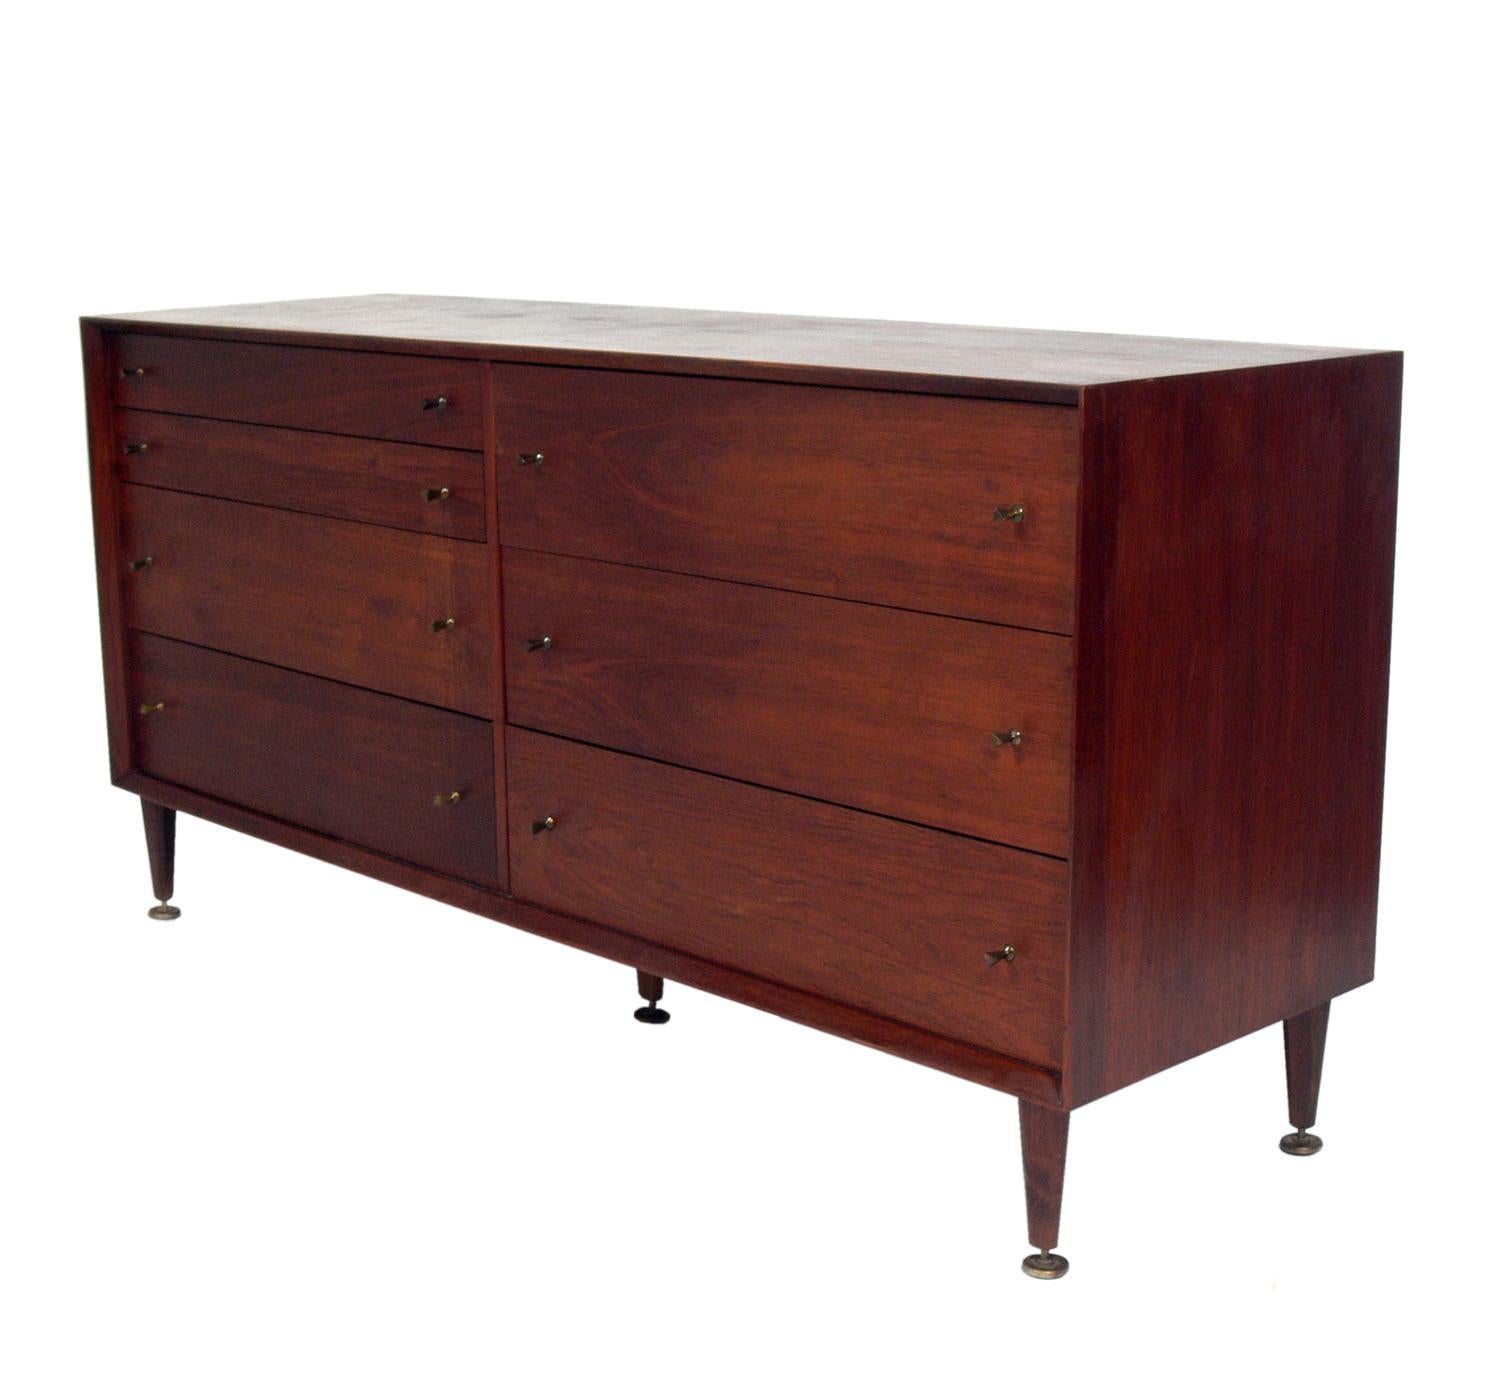 Mid-Century Modern walnut chest or dresser, designed by Marc Berge for Grosfeld House, American, circa 1960s. This chest is currently being refinished and can be completed in your choice of color. The price noted below includes refinishing in your